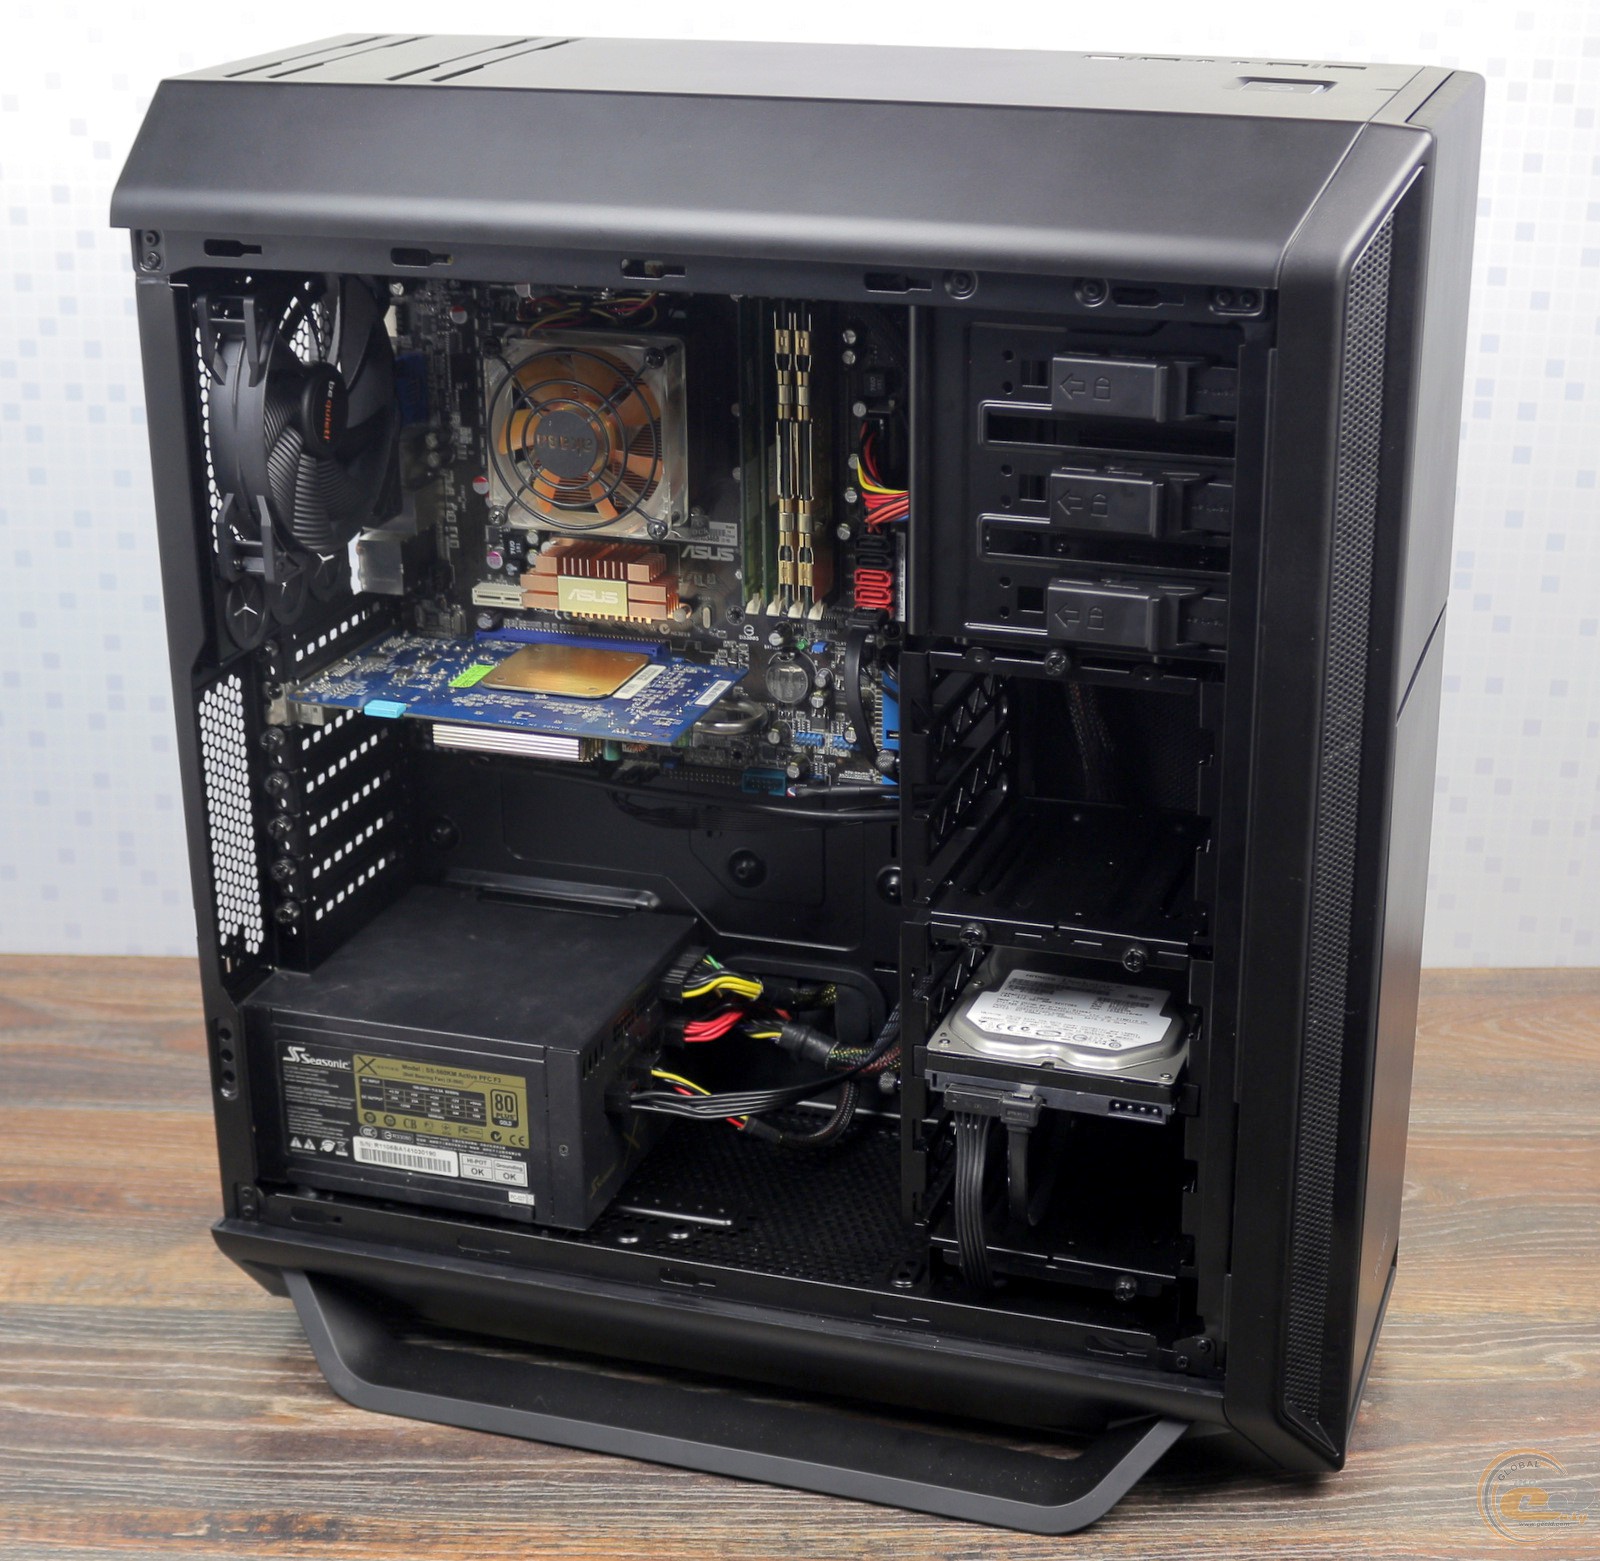 Корпус be quiet Silent Base 800. Be quiet Silent Base 800 СЖО. Thermaltake Chaser a41. Be quiet! Silent Base 802 Window White. Quiet base 800